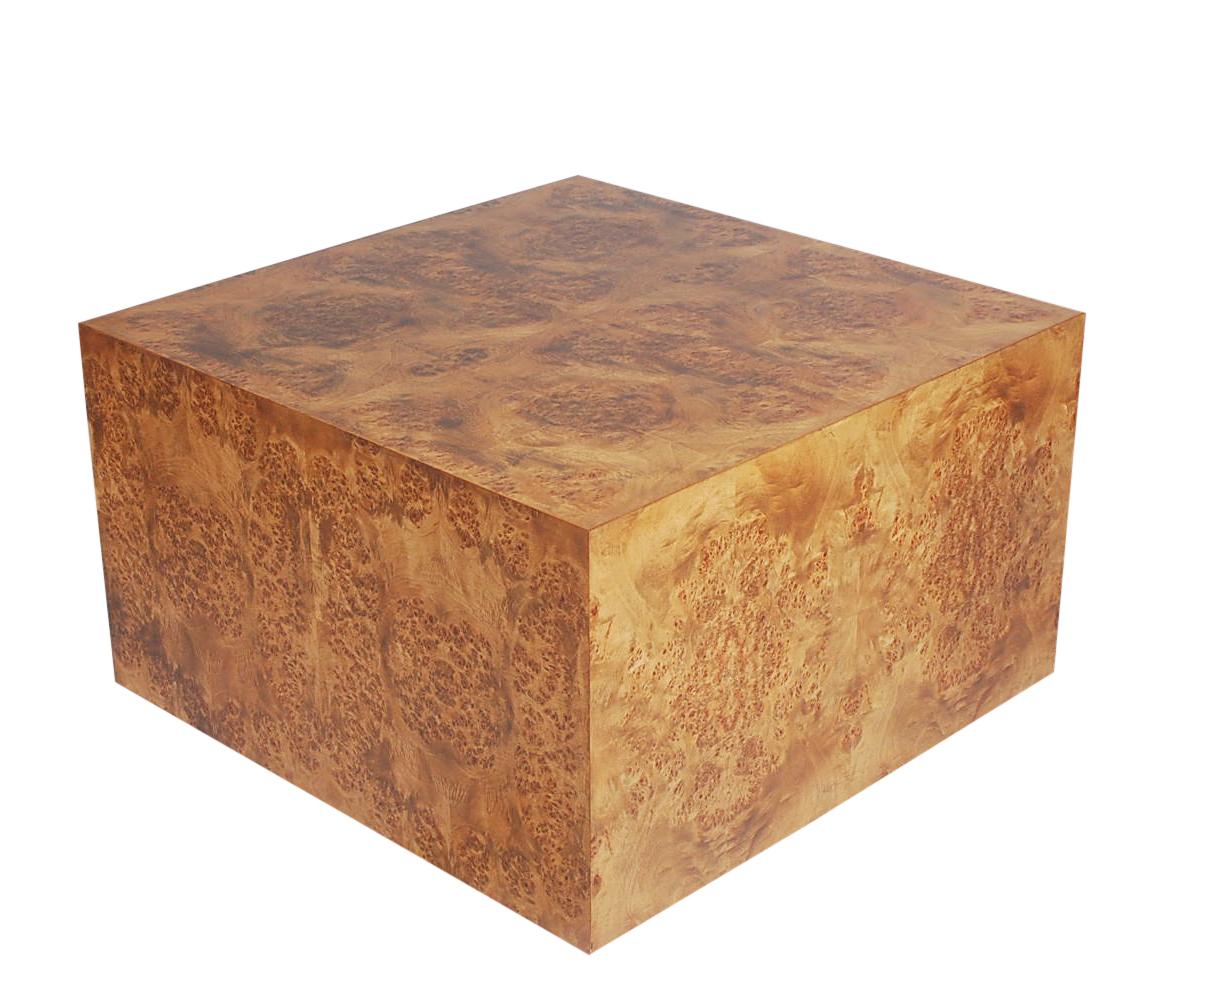 American Mid-Century Modern Burl Cube Coffee Table or Large Side Table by Milo Baughman